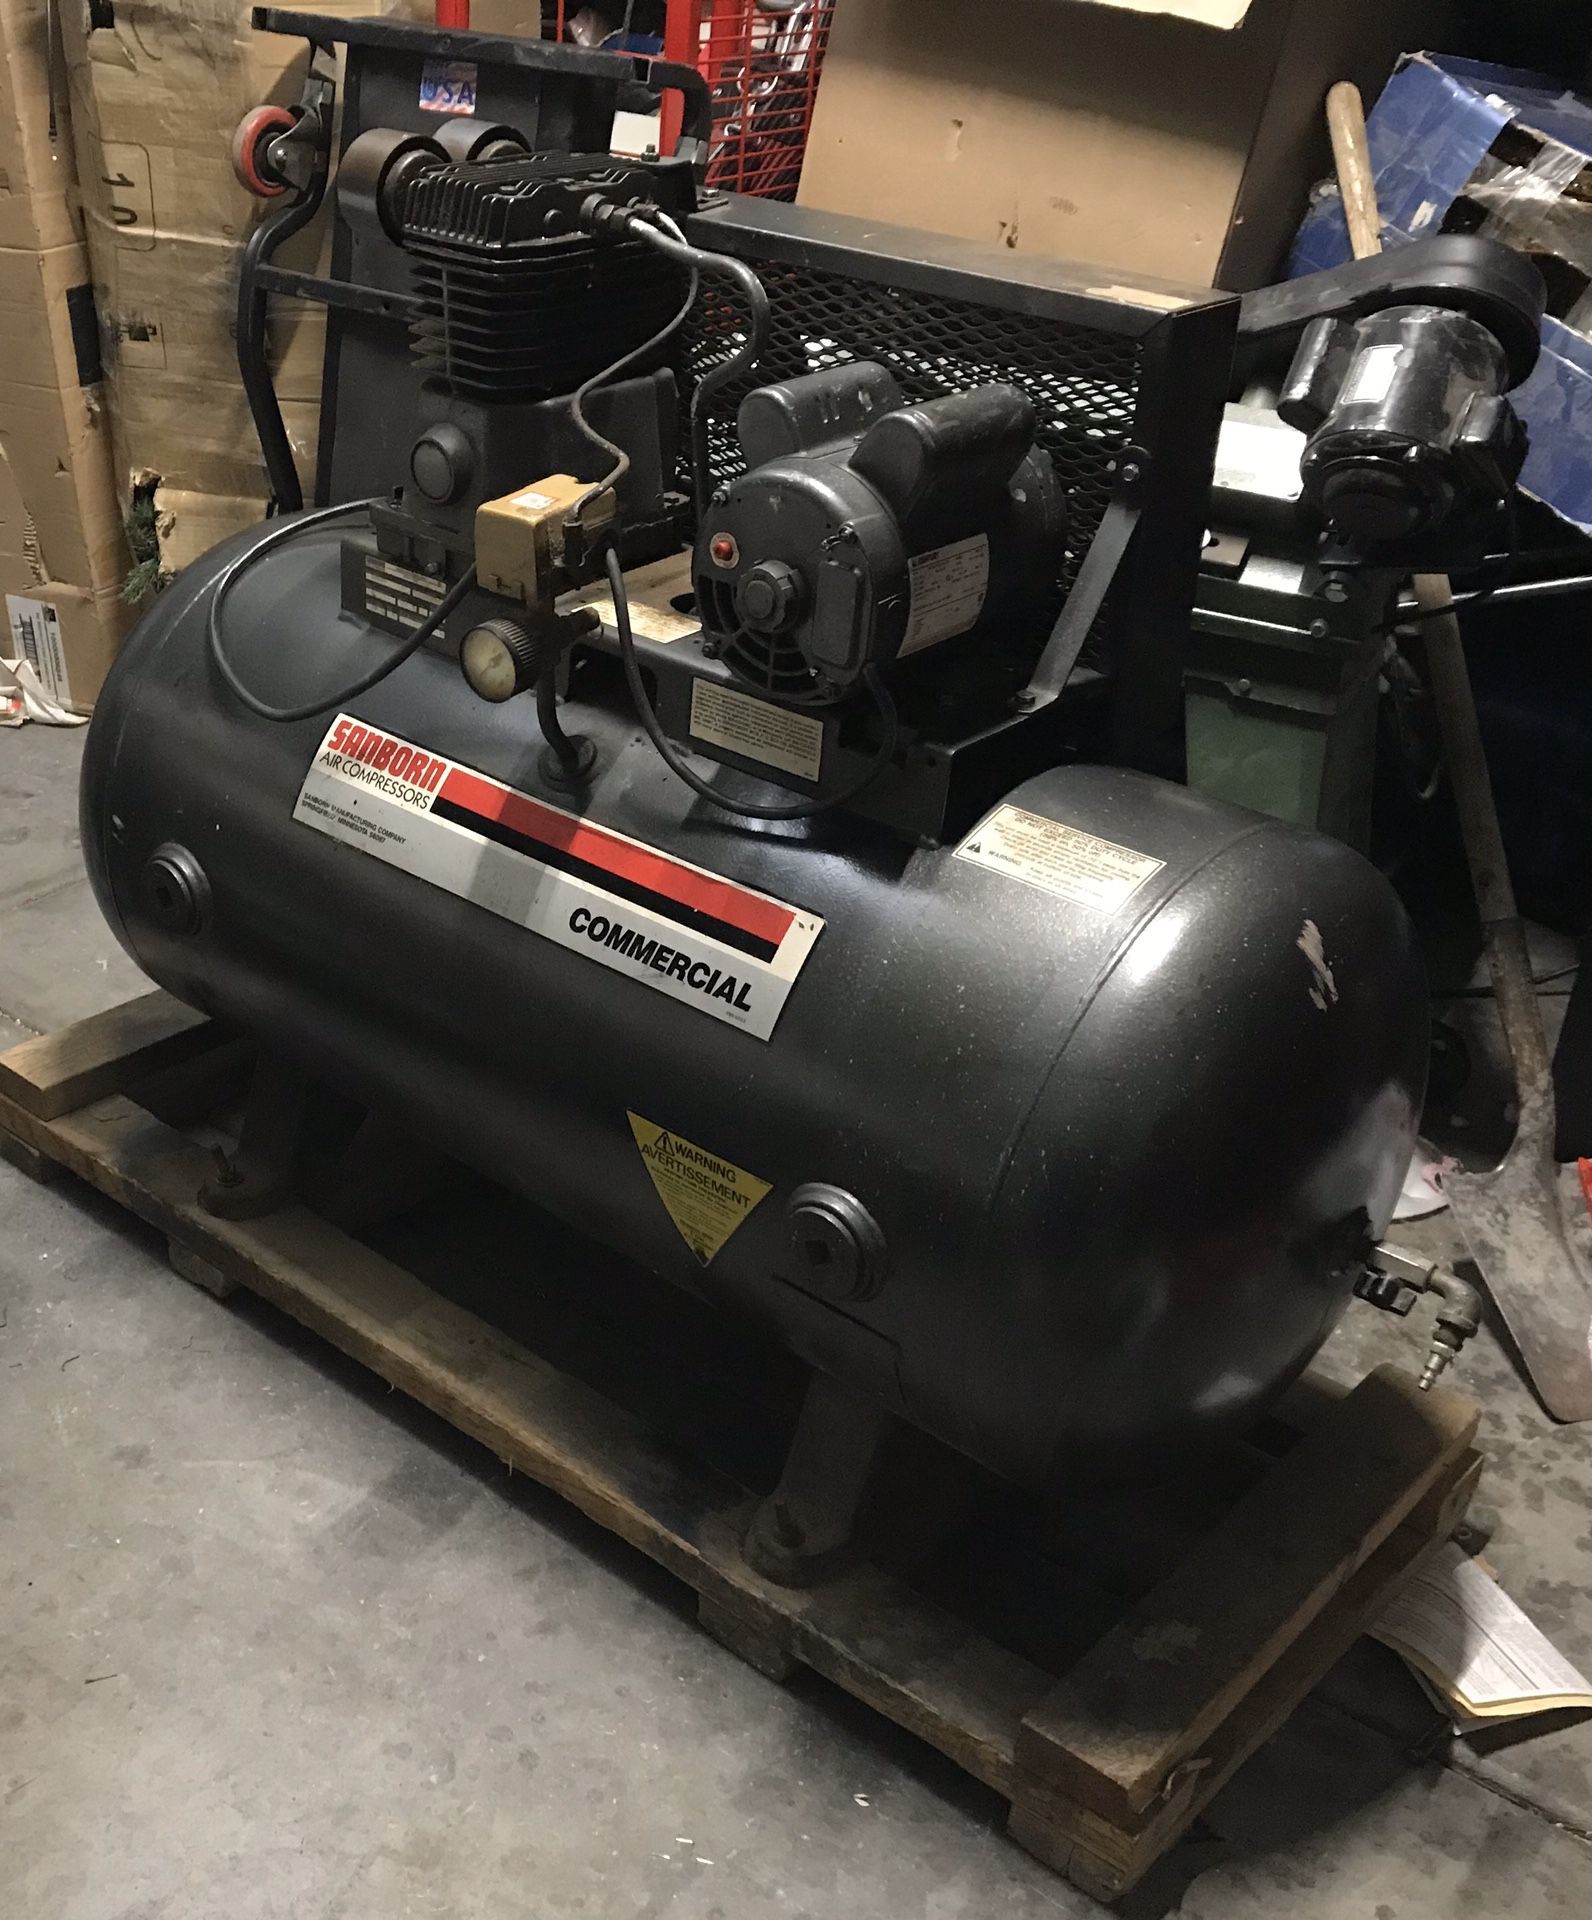 Sanborn commercial air compressor 5hp works like new